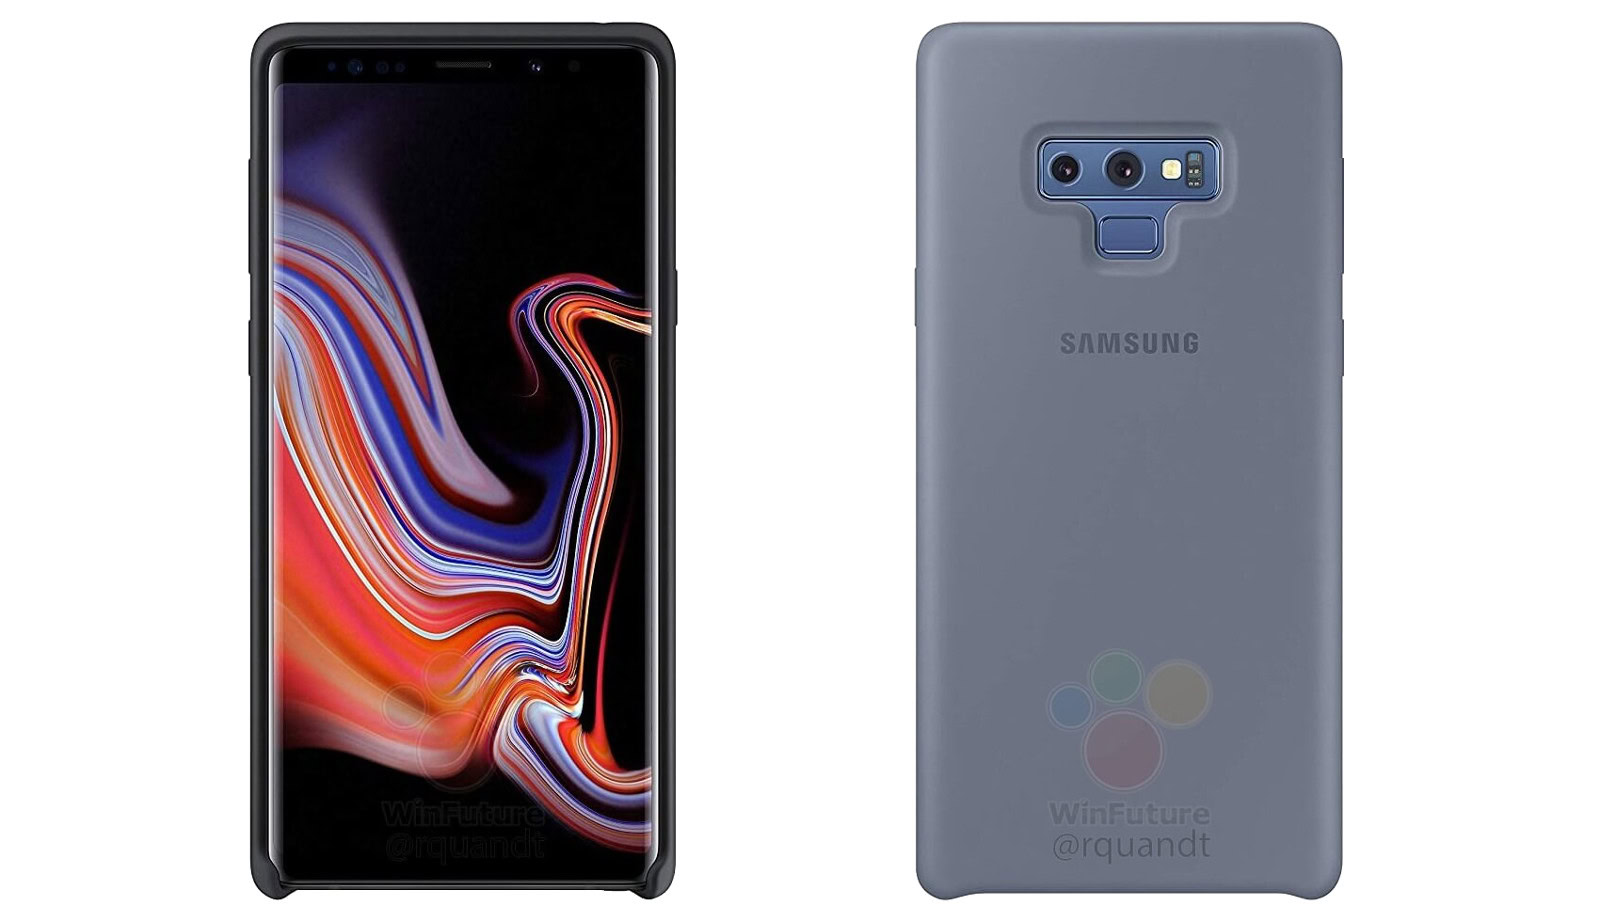 Samsung Galaxy Note 9: Specs, release date, price, and more